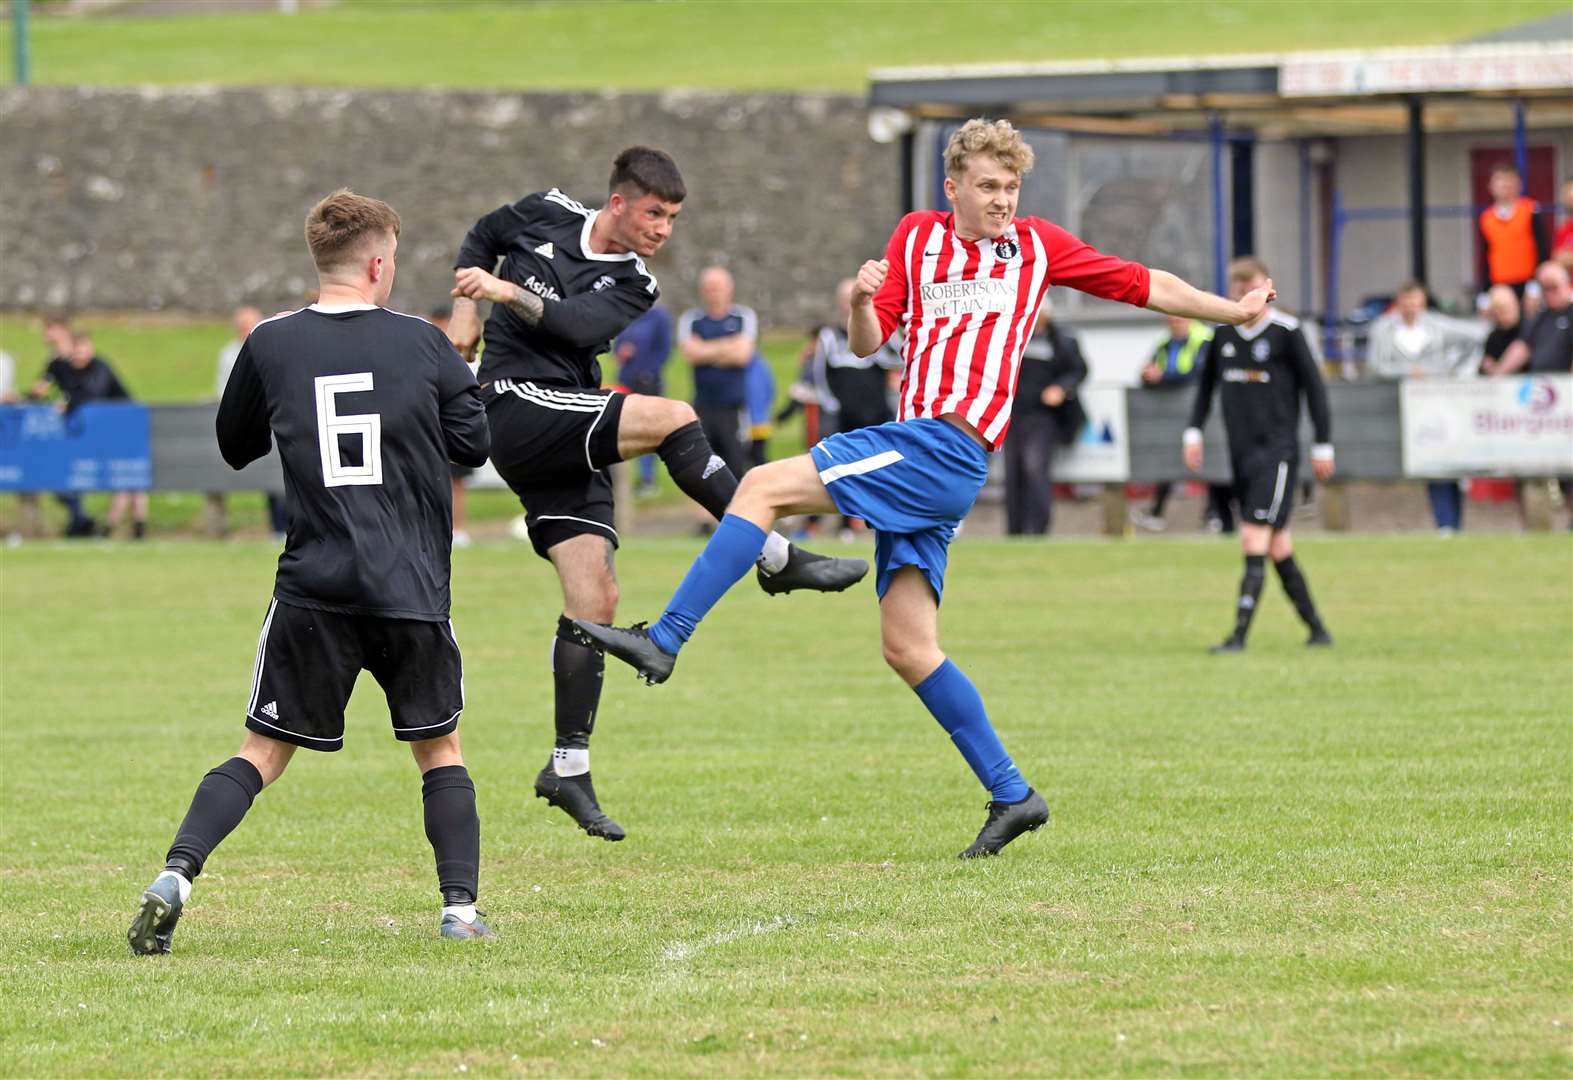 We should have picked up six points instead of two, says Reid as Thurso are held again